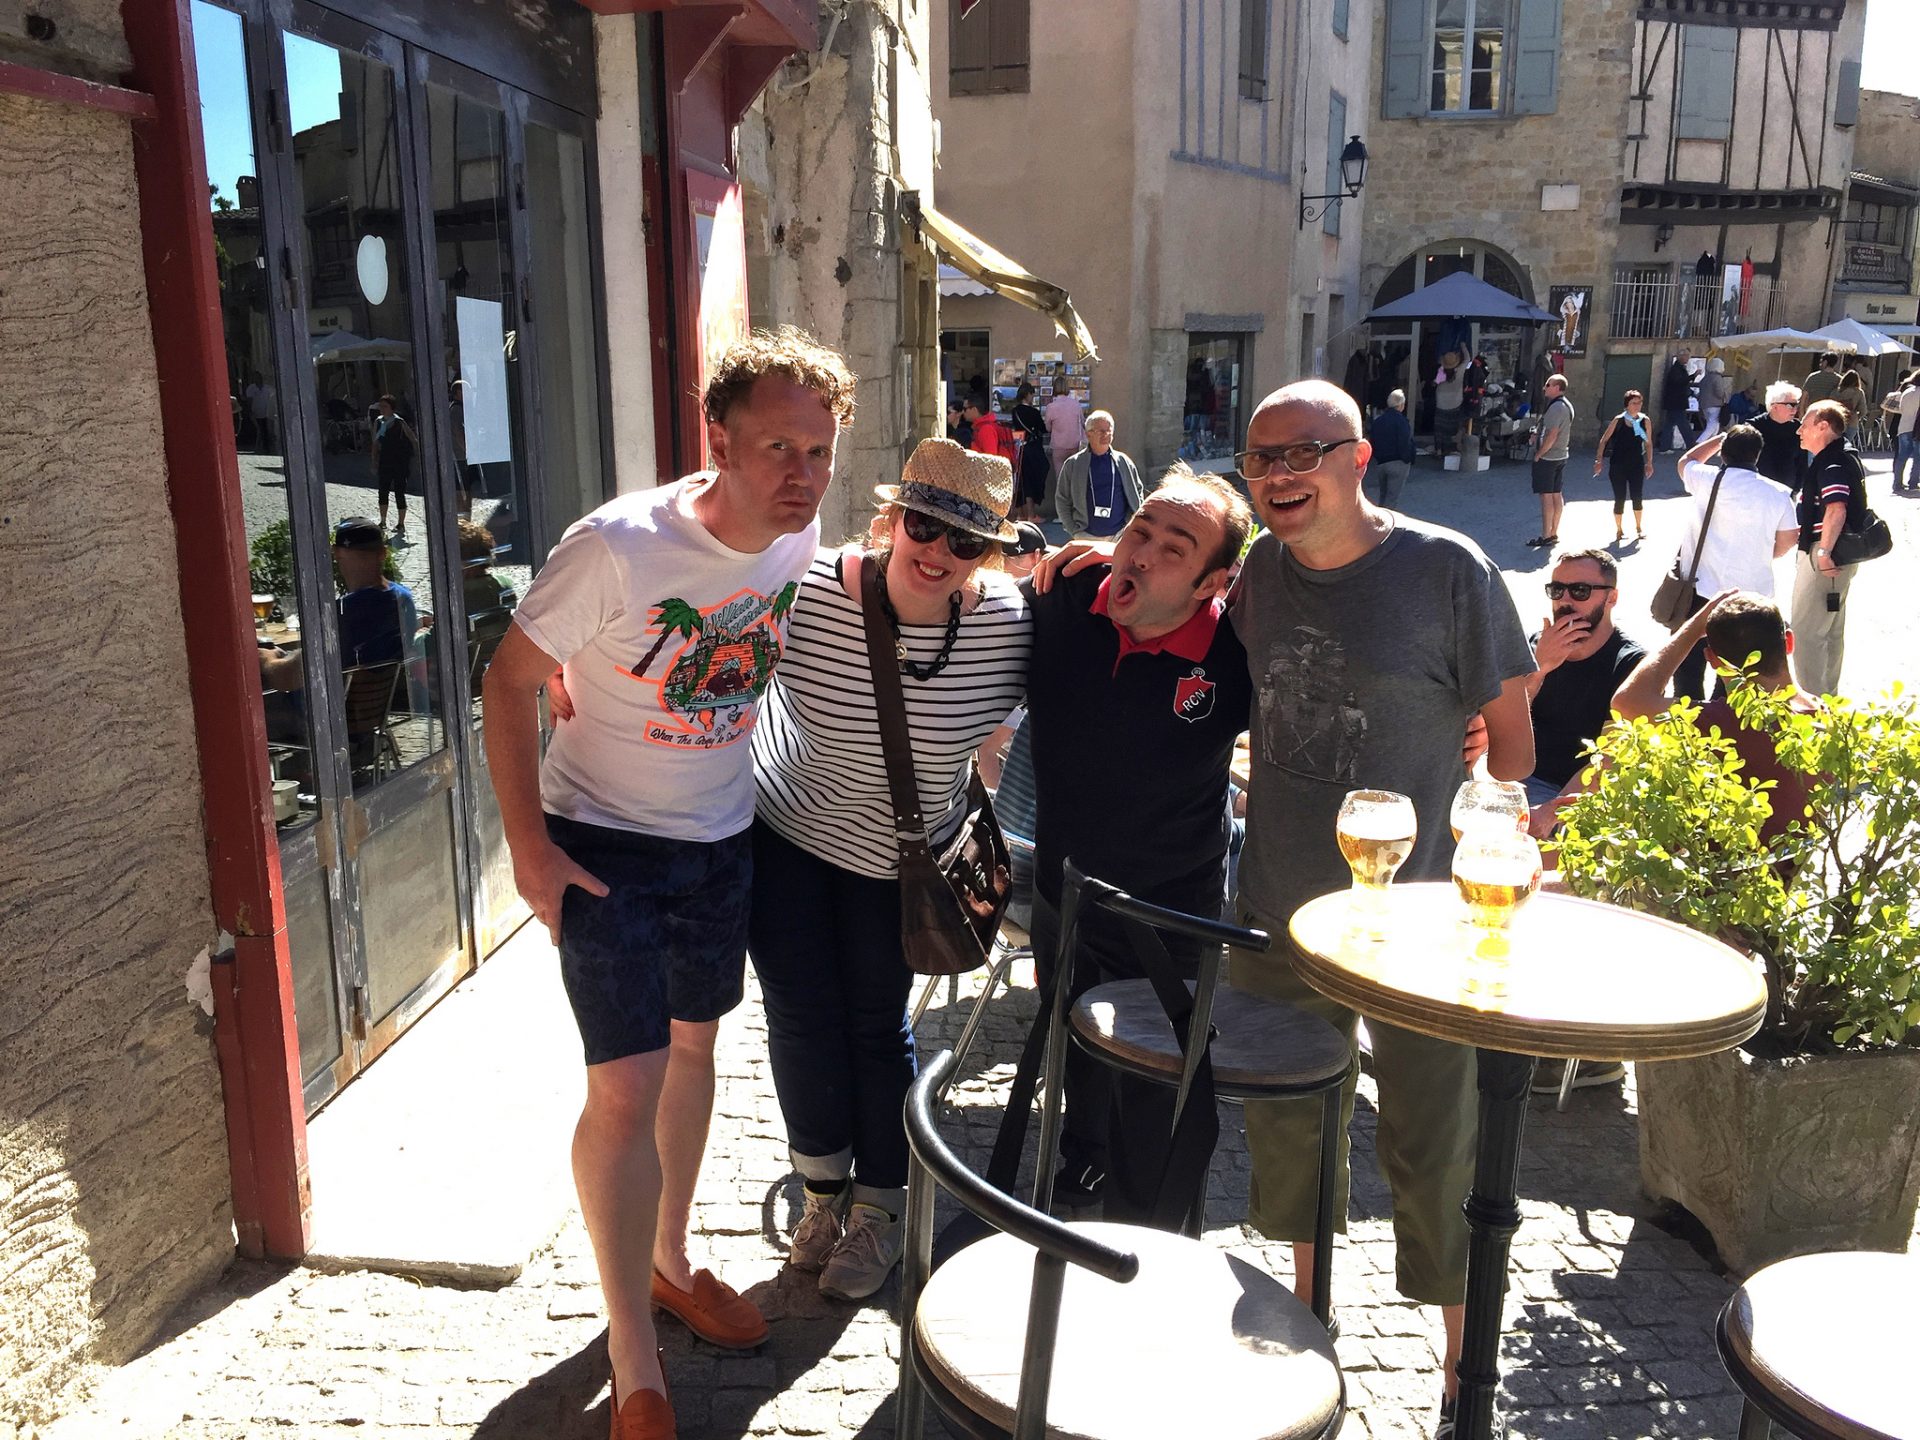 With Lorna Drummond, Greg Bolton, and Carcassone Sommelier Olivier Zavattin, enjoying a few drinks in the old walled city.